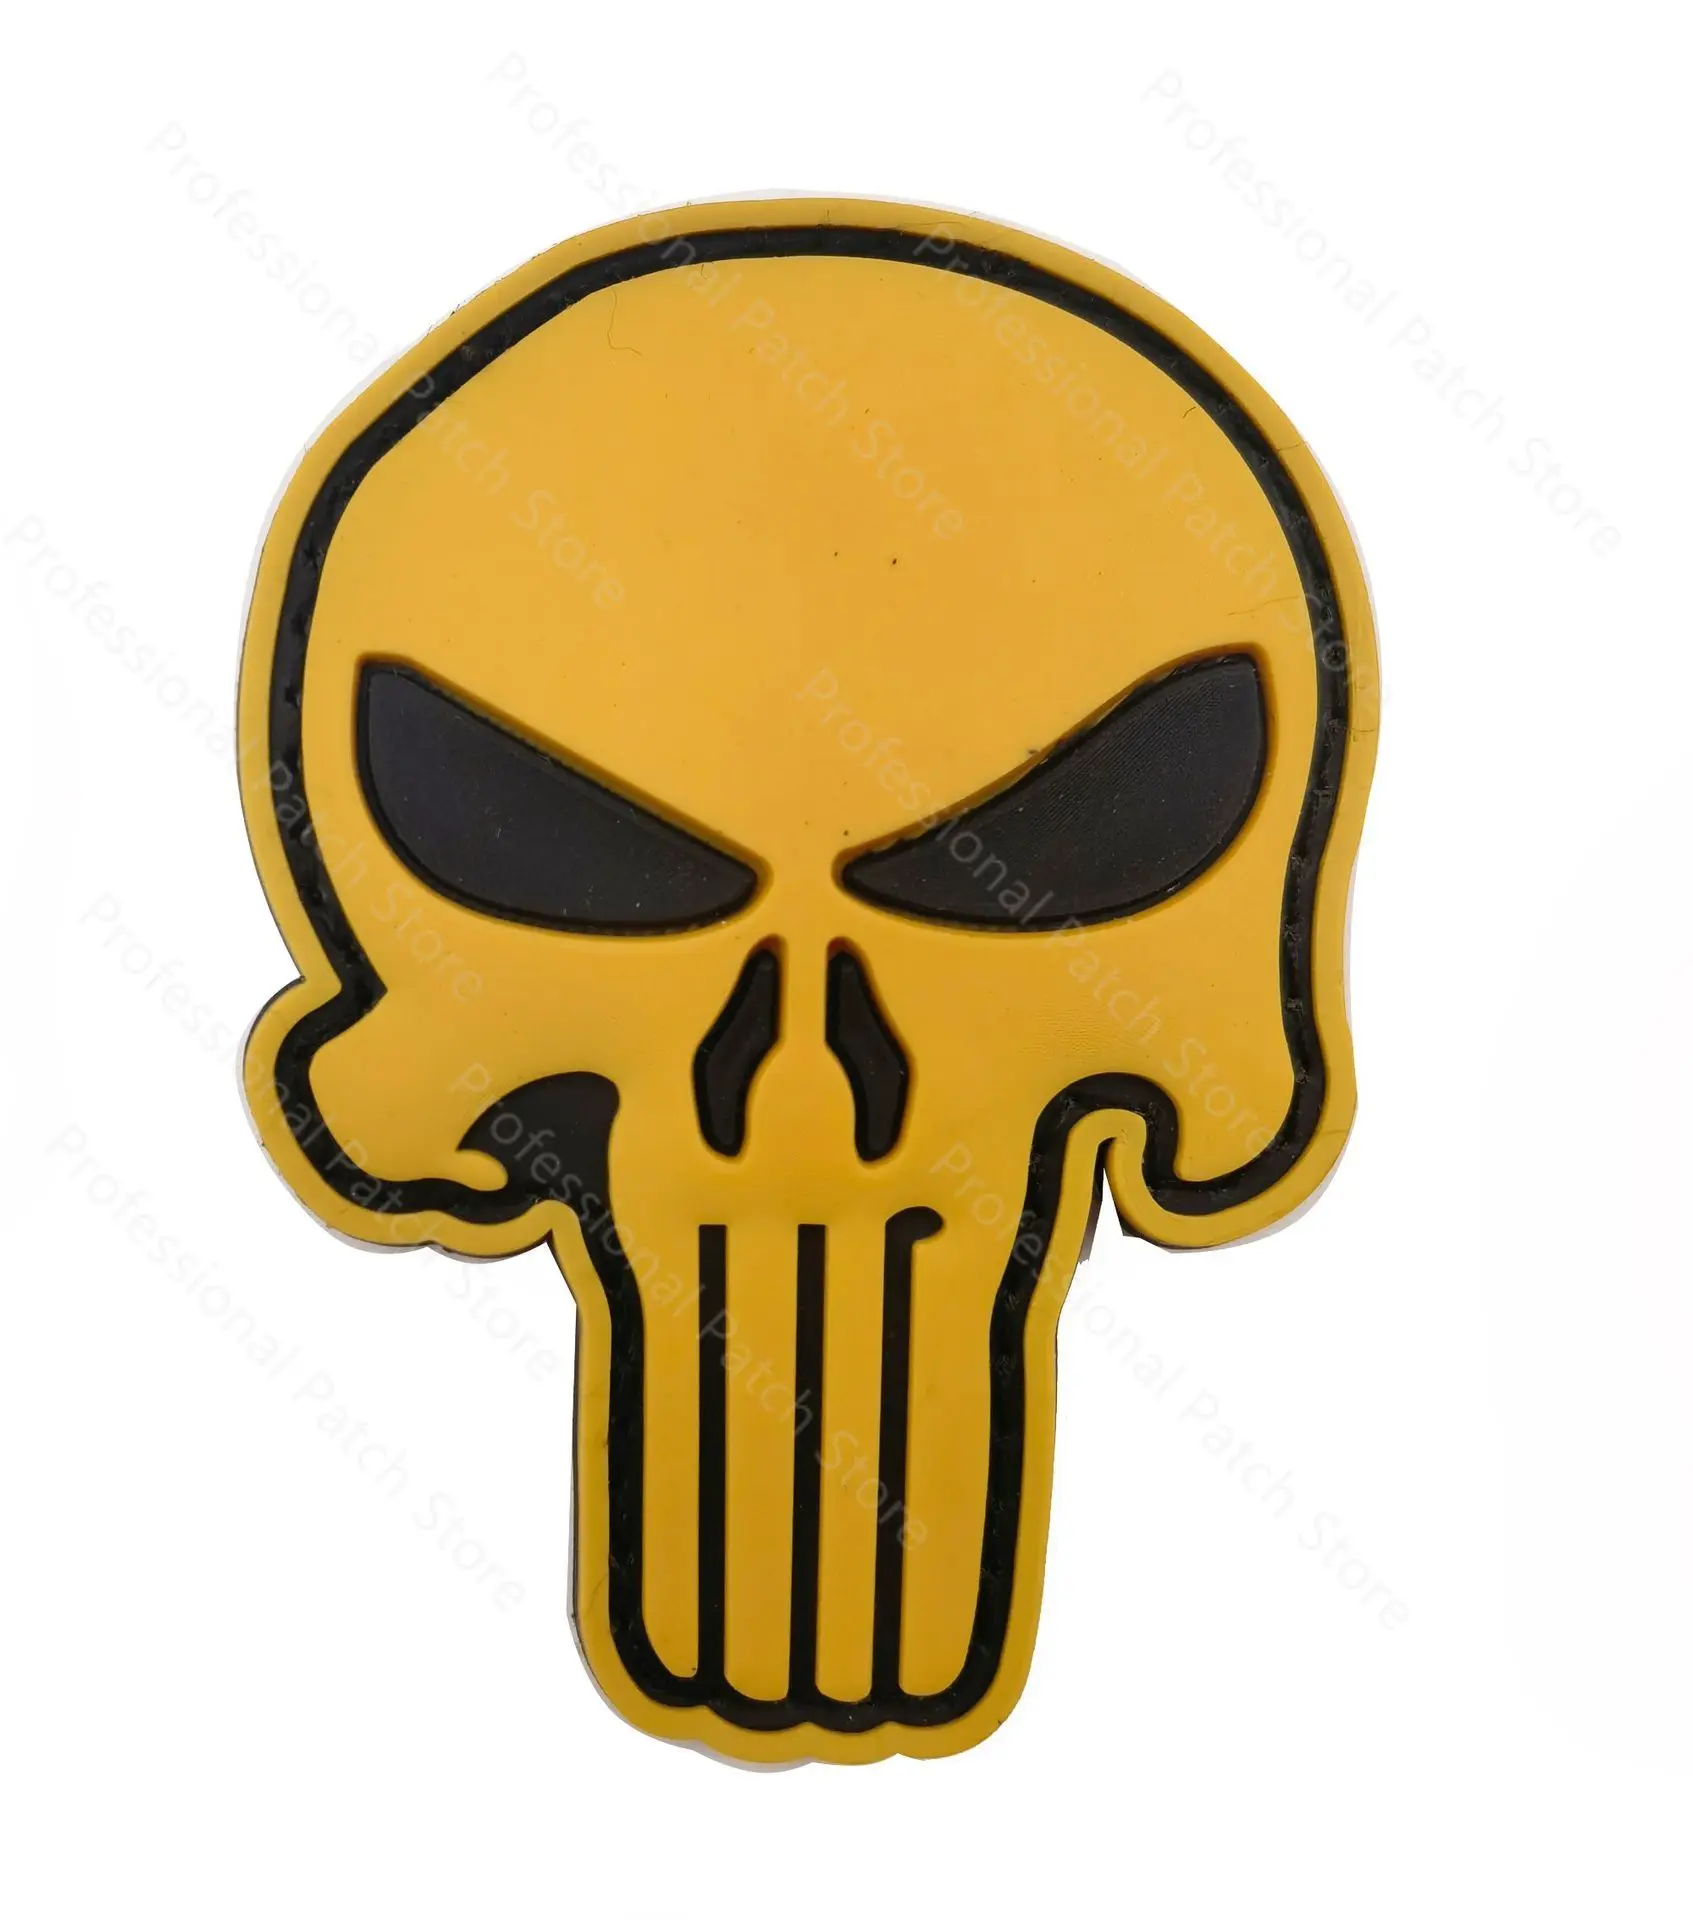 3D Tactical Patch Punisher Military Patches for Clothing